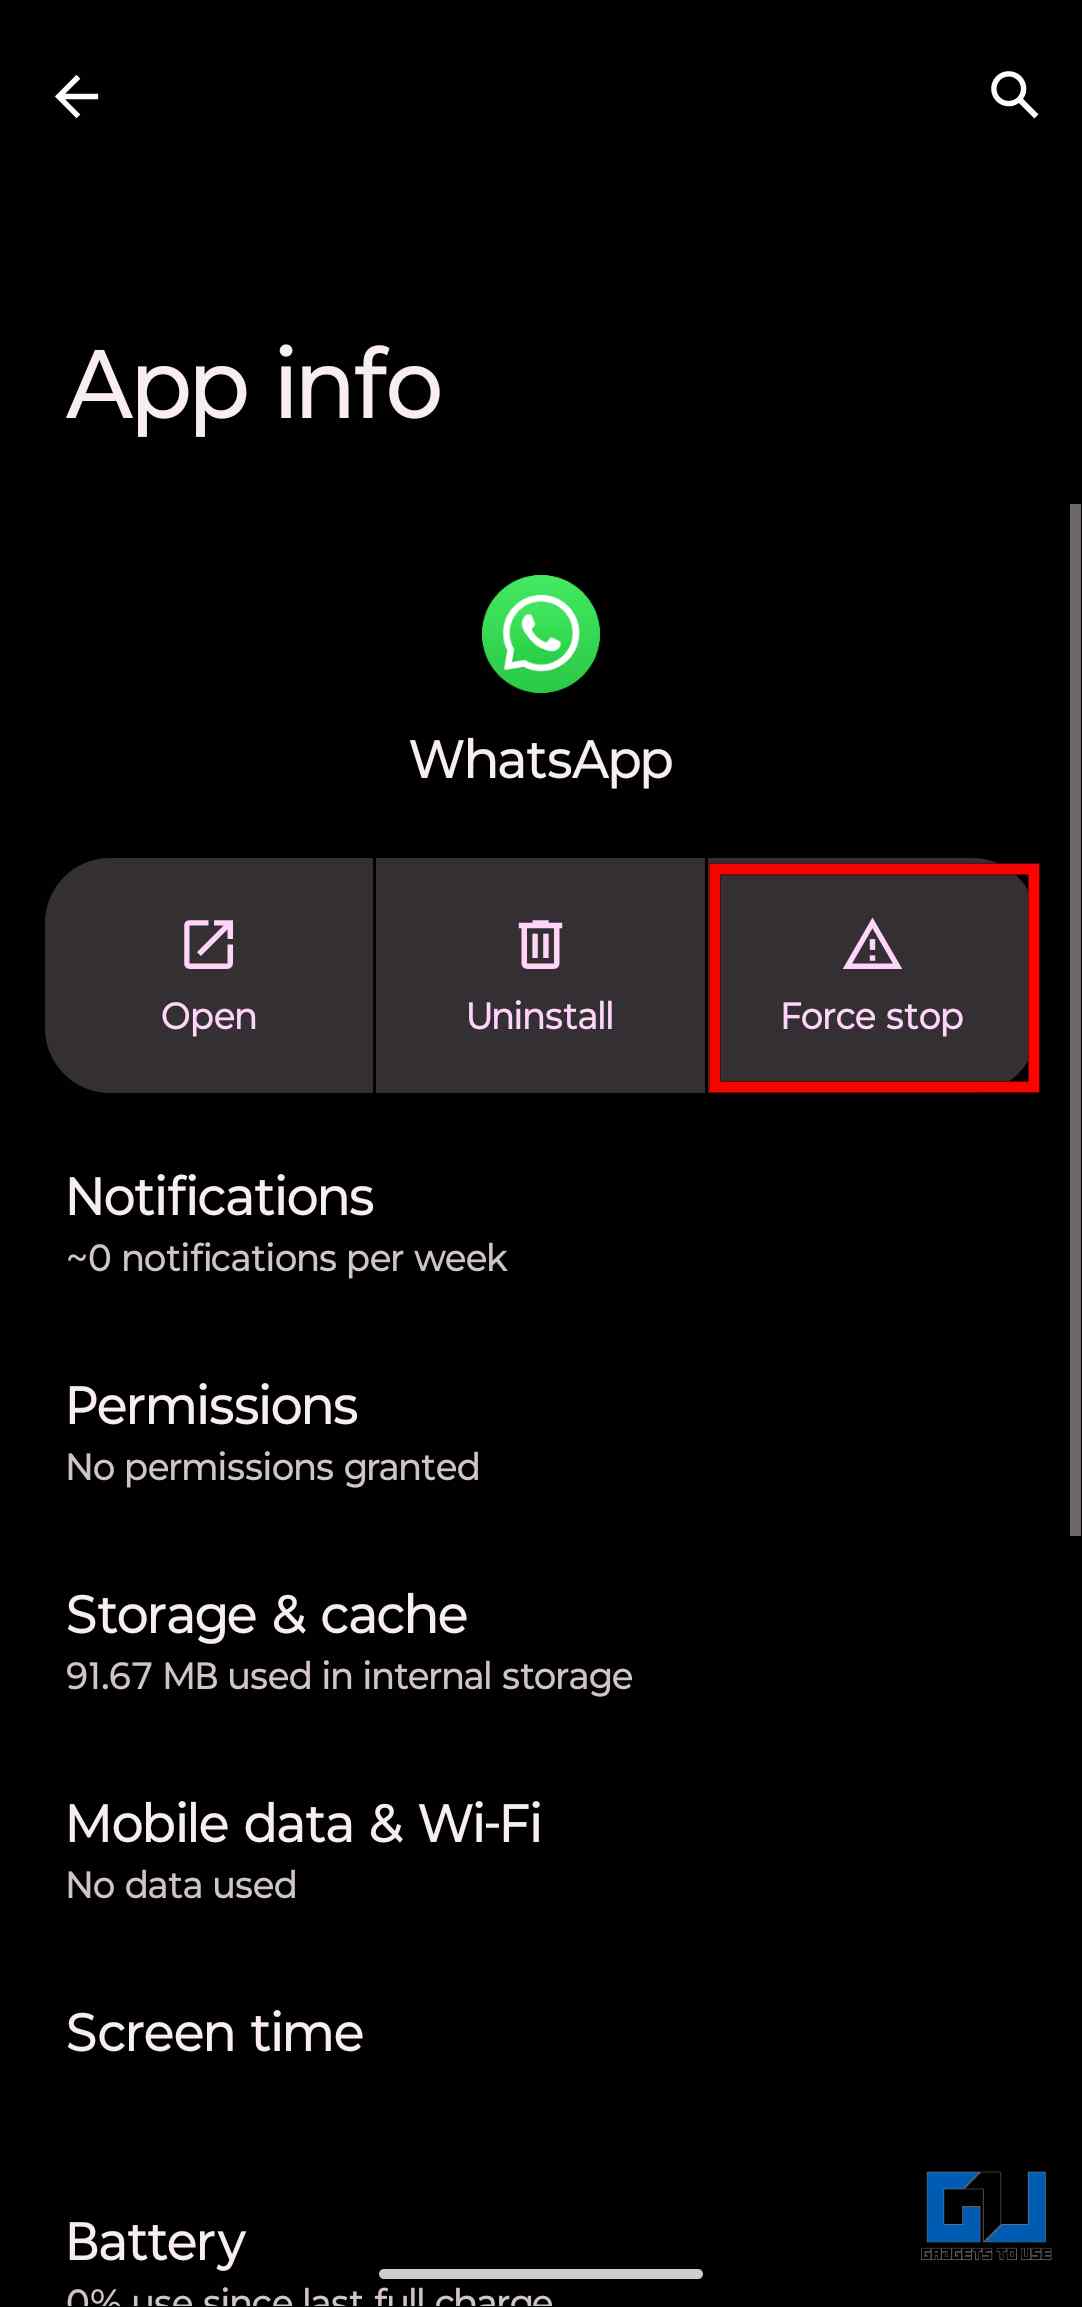 Force stop Whatsapp to Fix WhatsApp Beta out of date Error